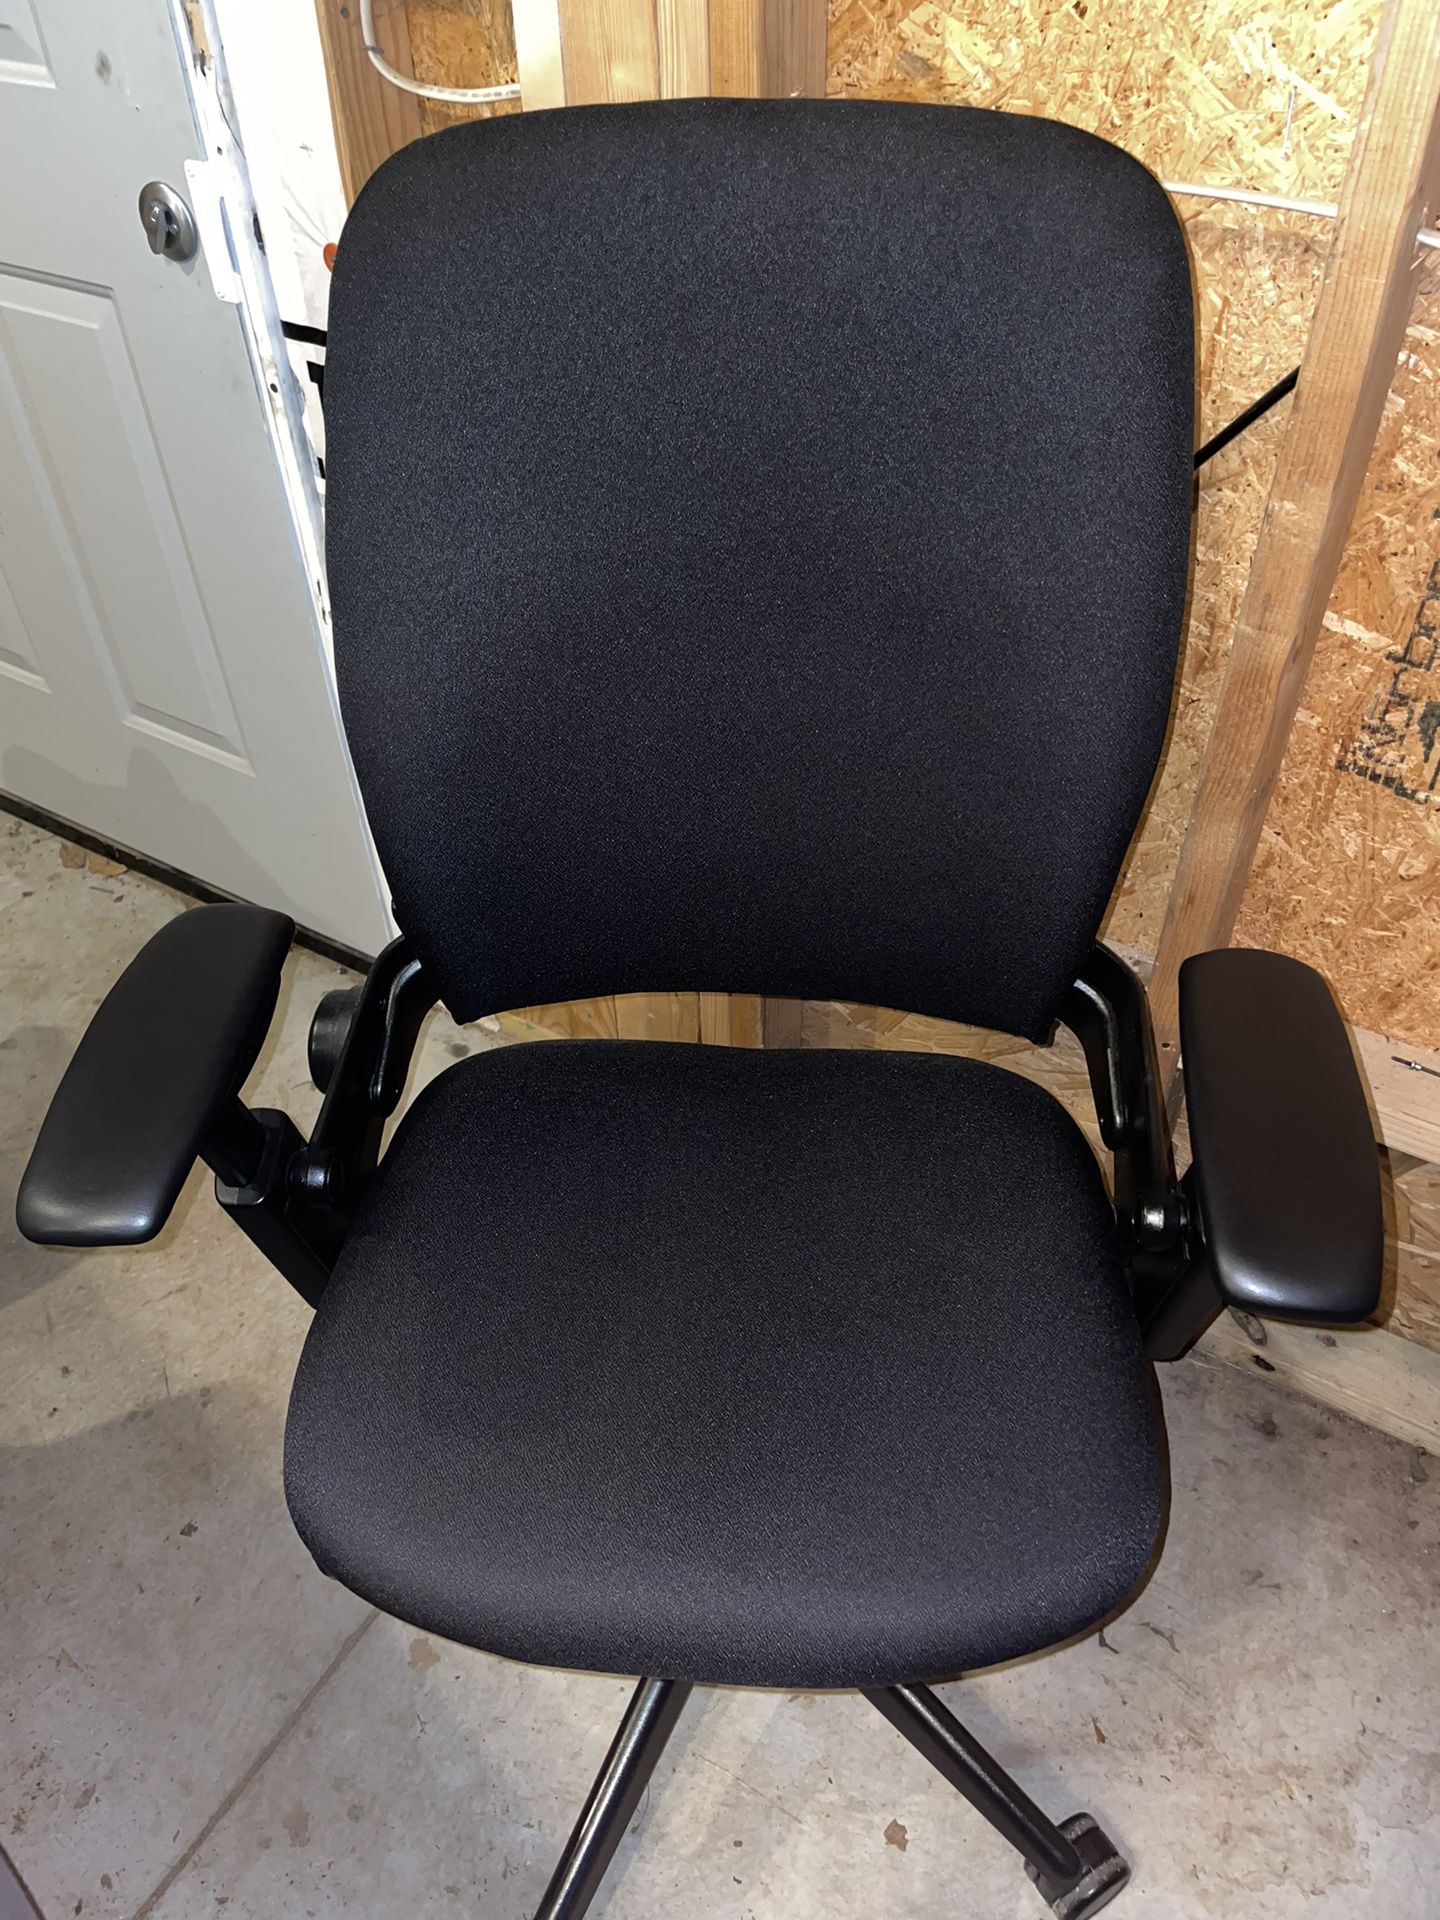 Steelcase Leap V2 with Leather Armpads